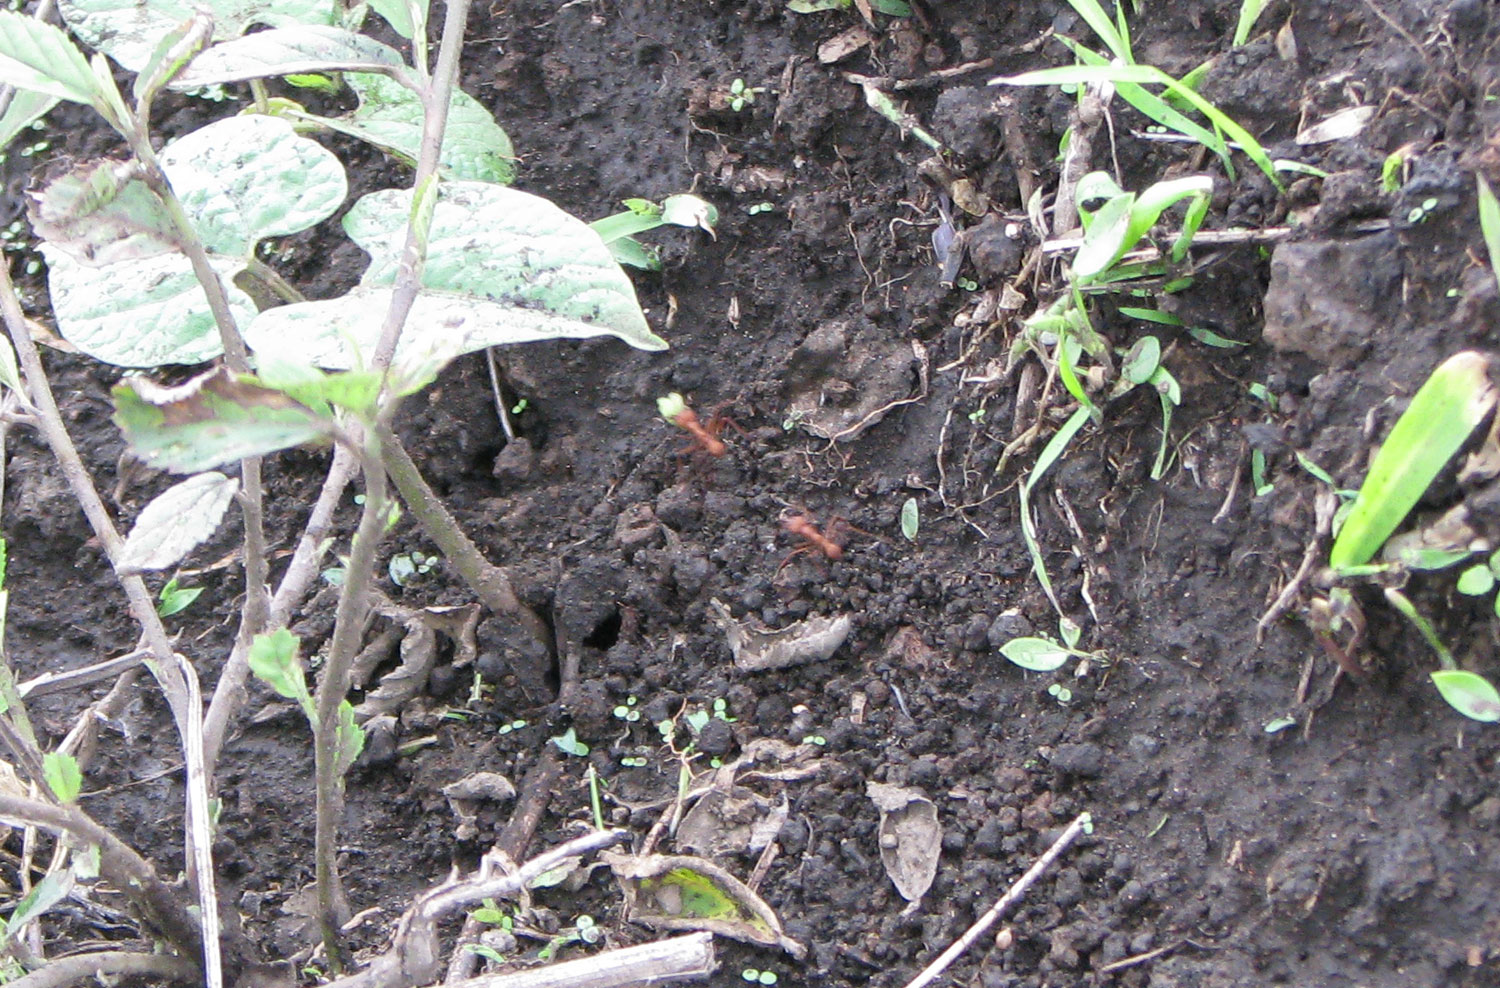 Leafcutter ants like these have been causing all kins of trouble for the reforestation project.